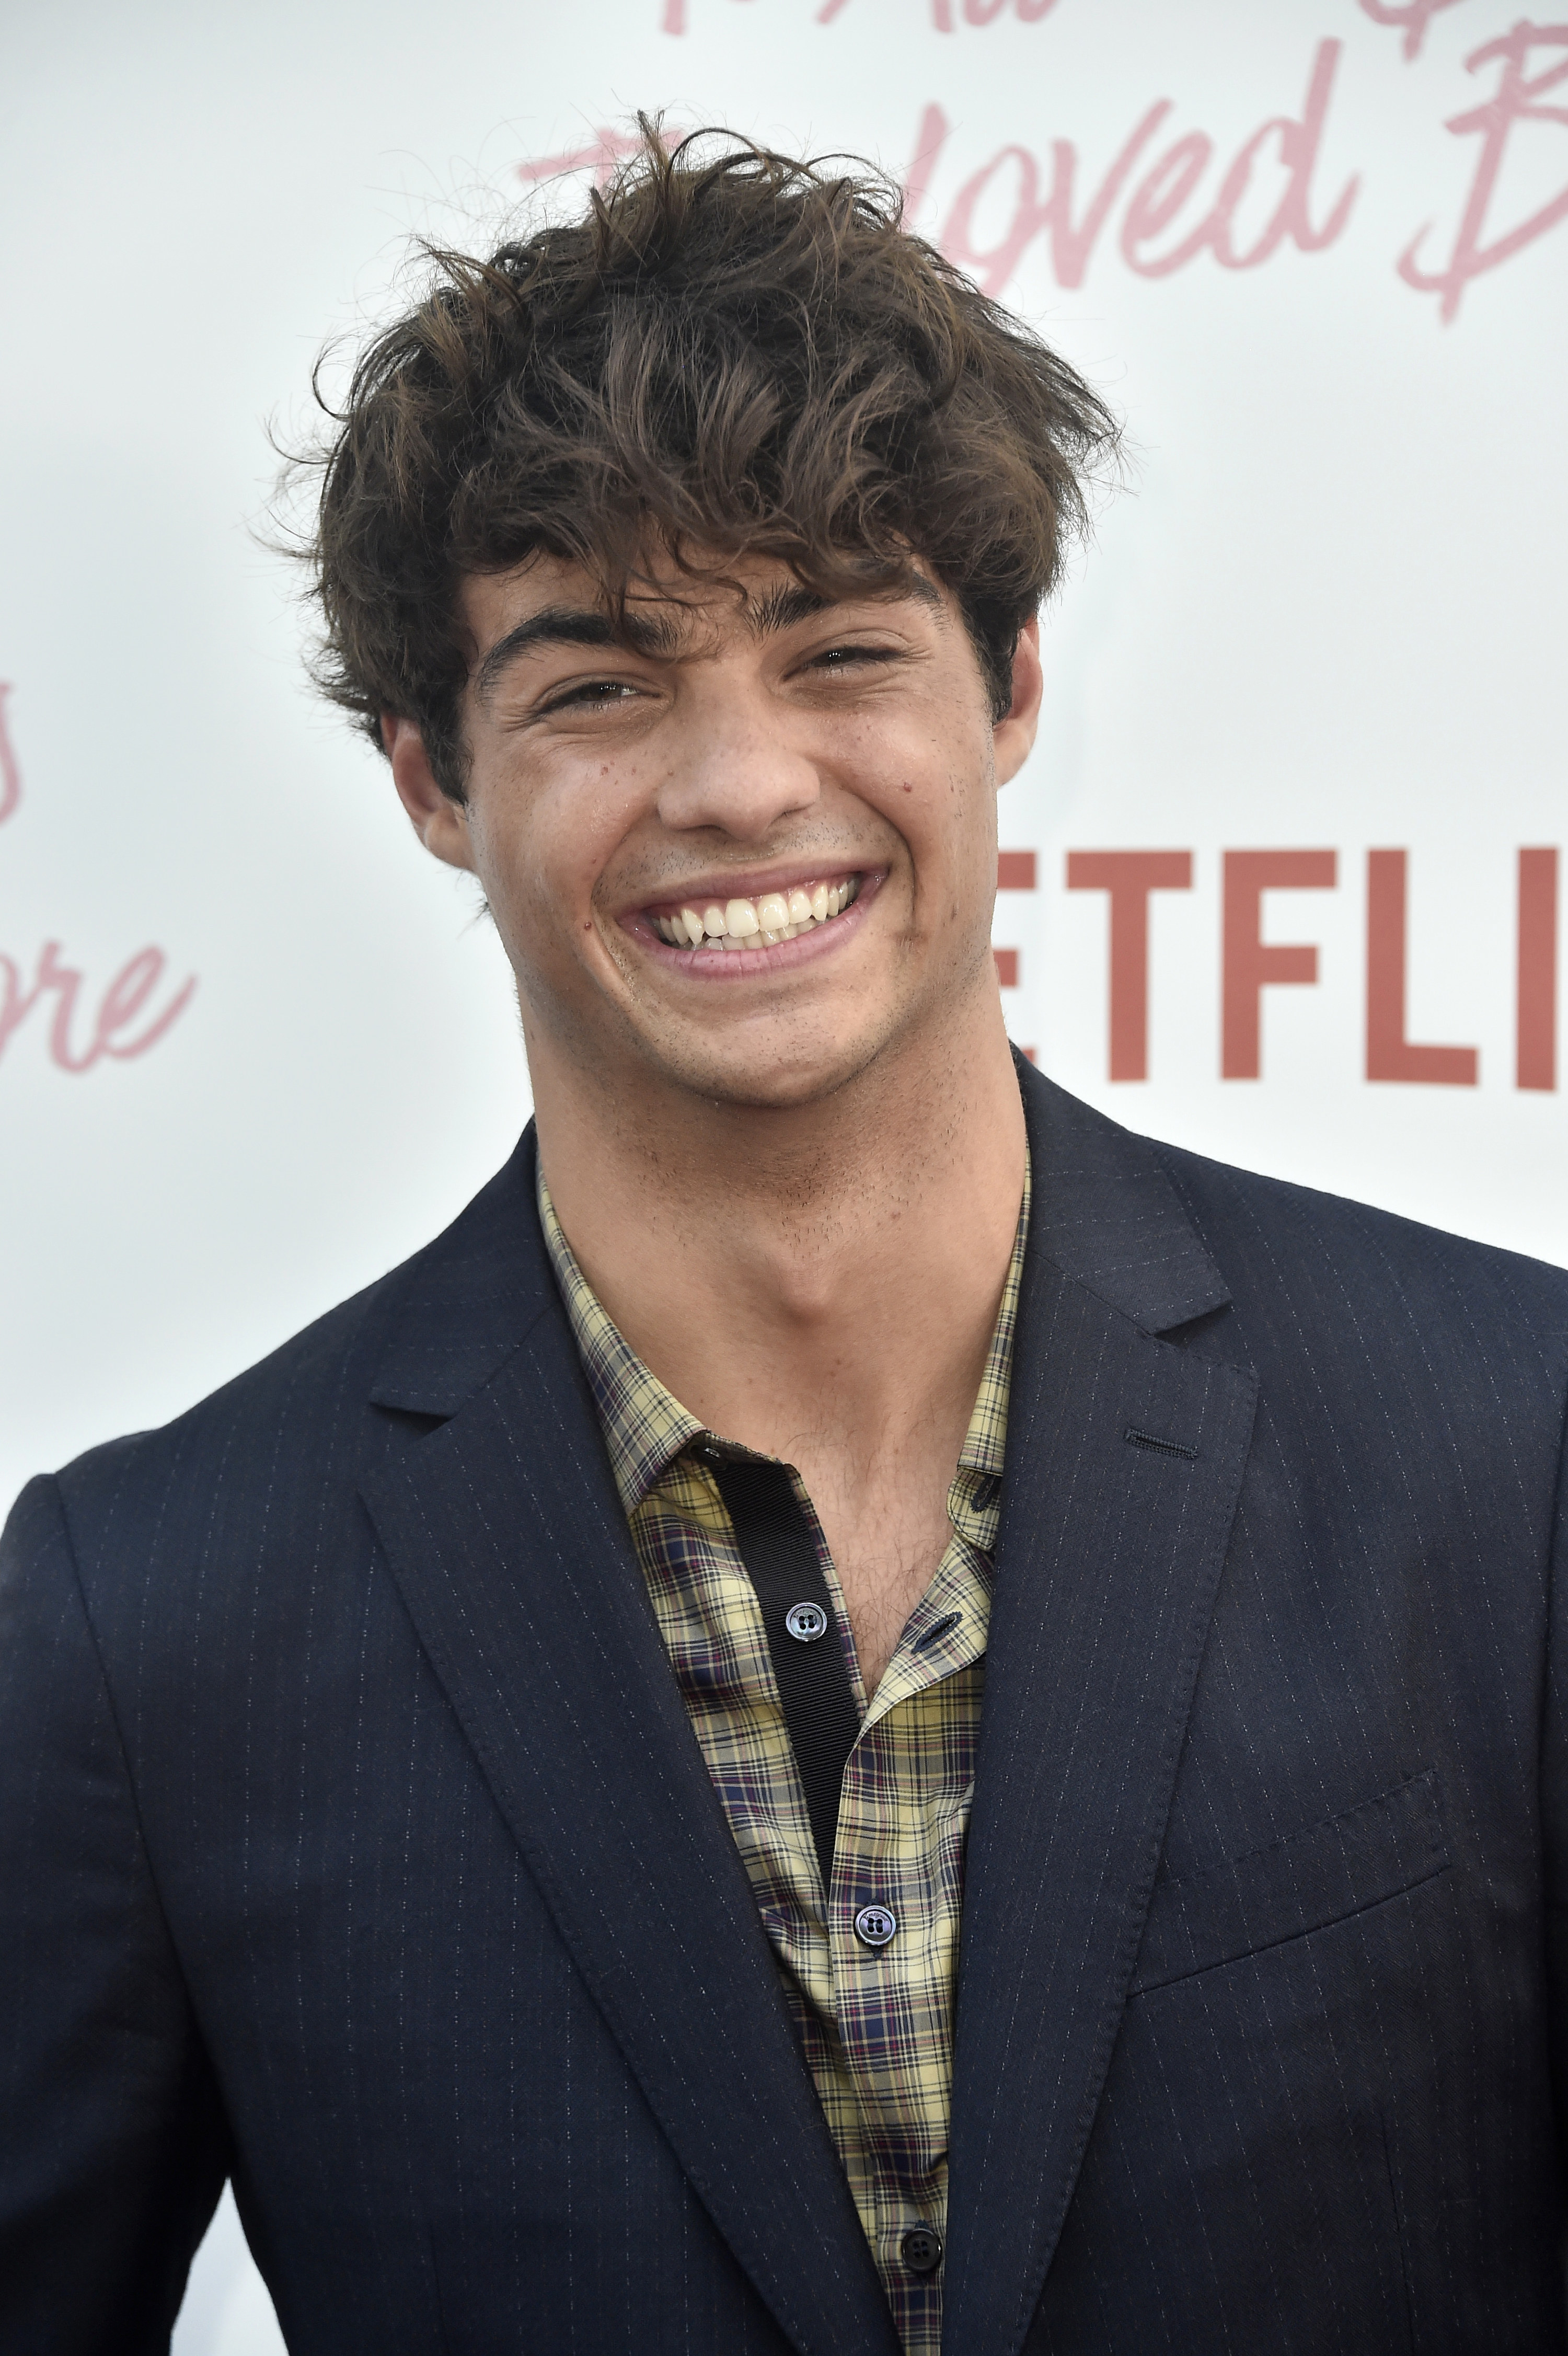 Noah Centineo attend the Screening Of Netflix&#x27;s &quot;To All The Boys I&#x27;ve Loved Before&quot; - Arrivals at Arclight Cinemas Culver City on August 16, 2018 in Culver City, California